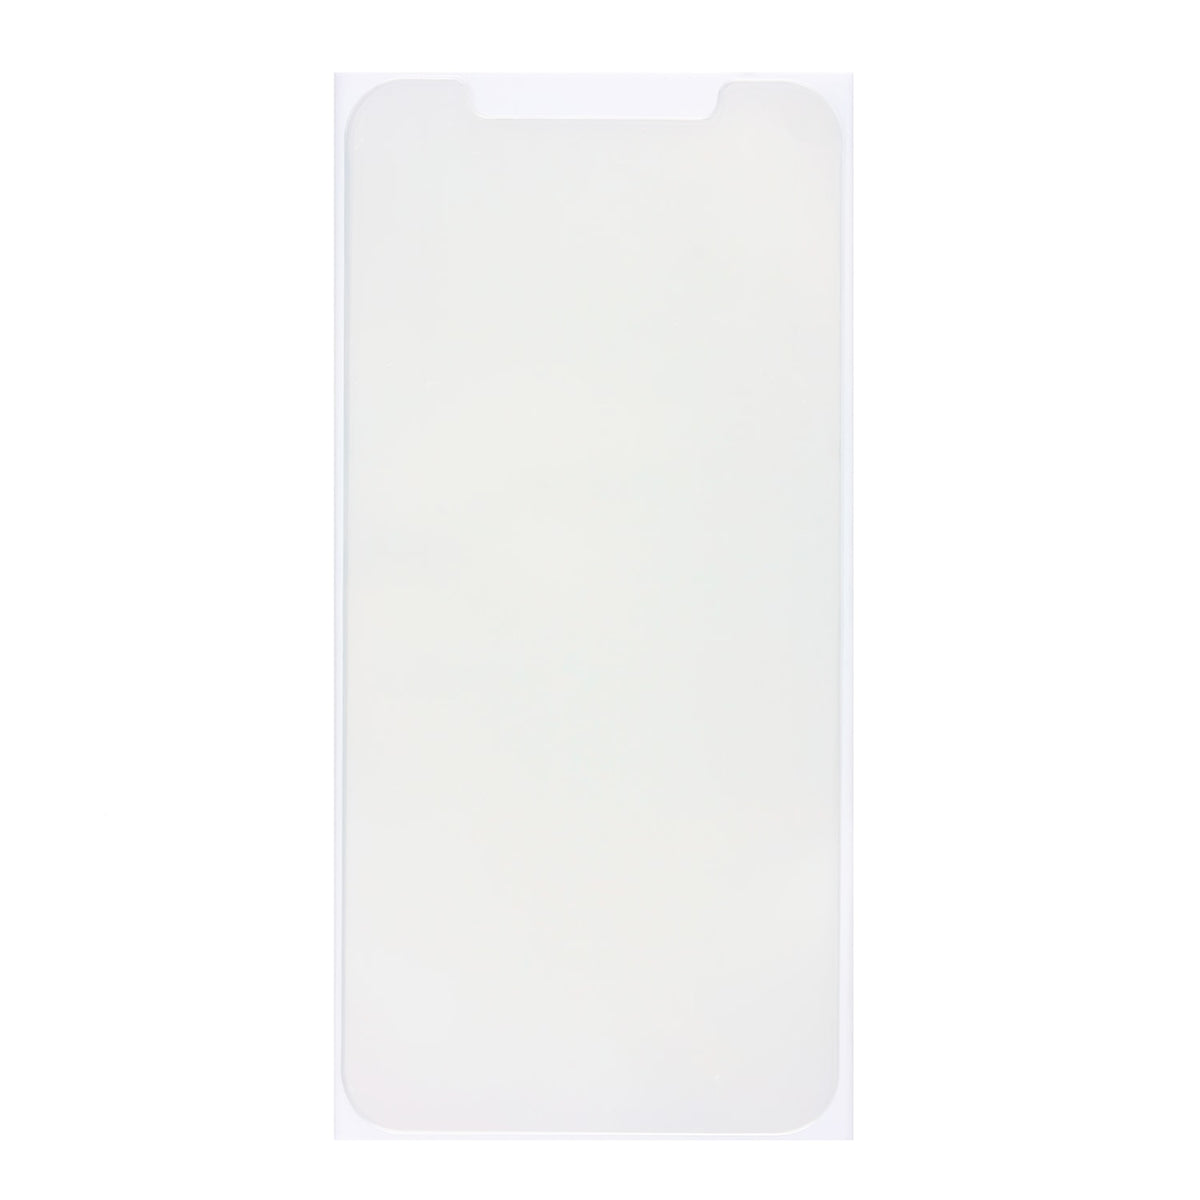 1PCS OCA OPTICAL CLEAR ADHESIVE DOUBLE-SIDE STICKER FOR IPHONE X/XS